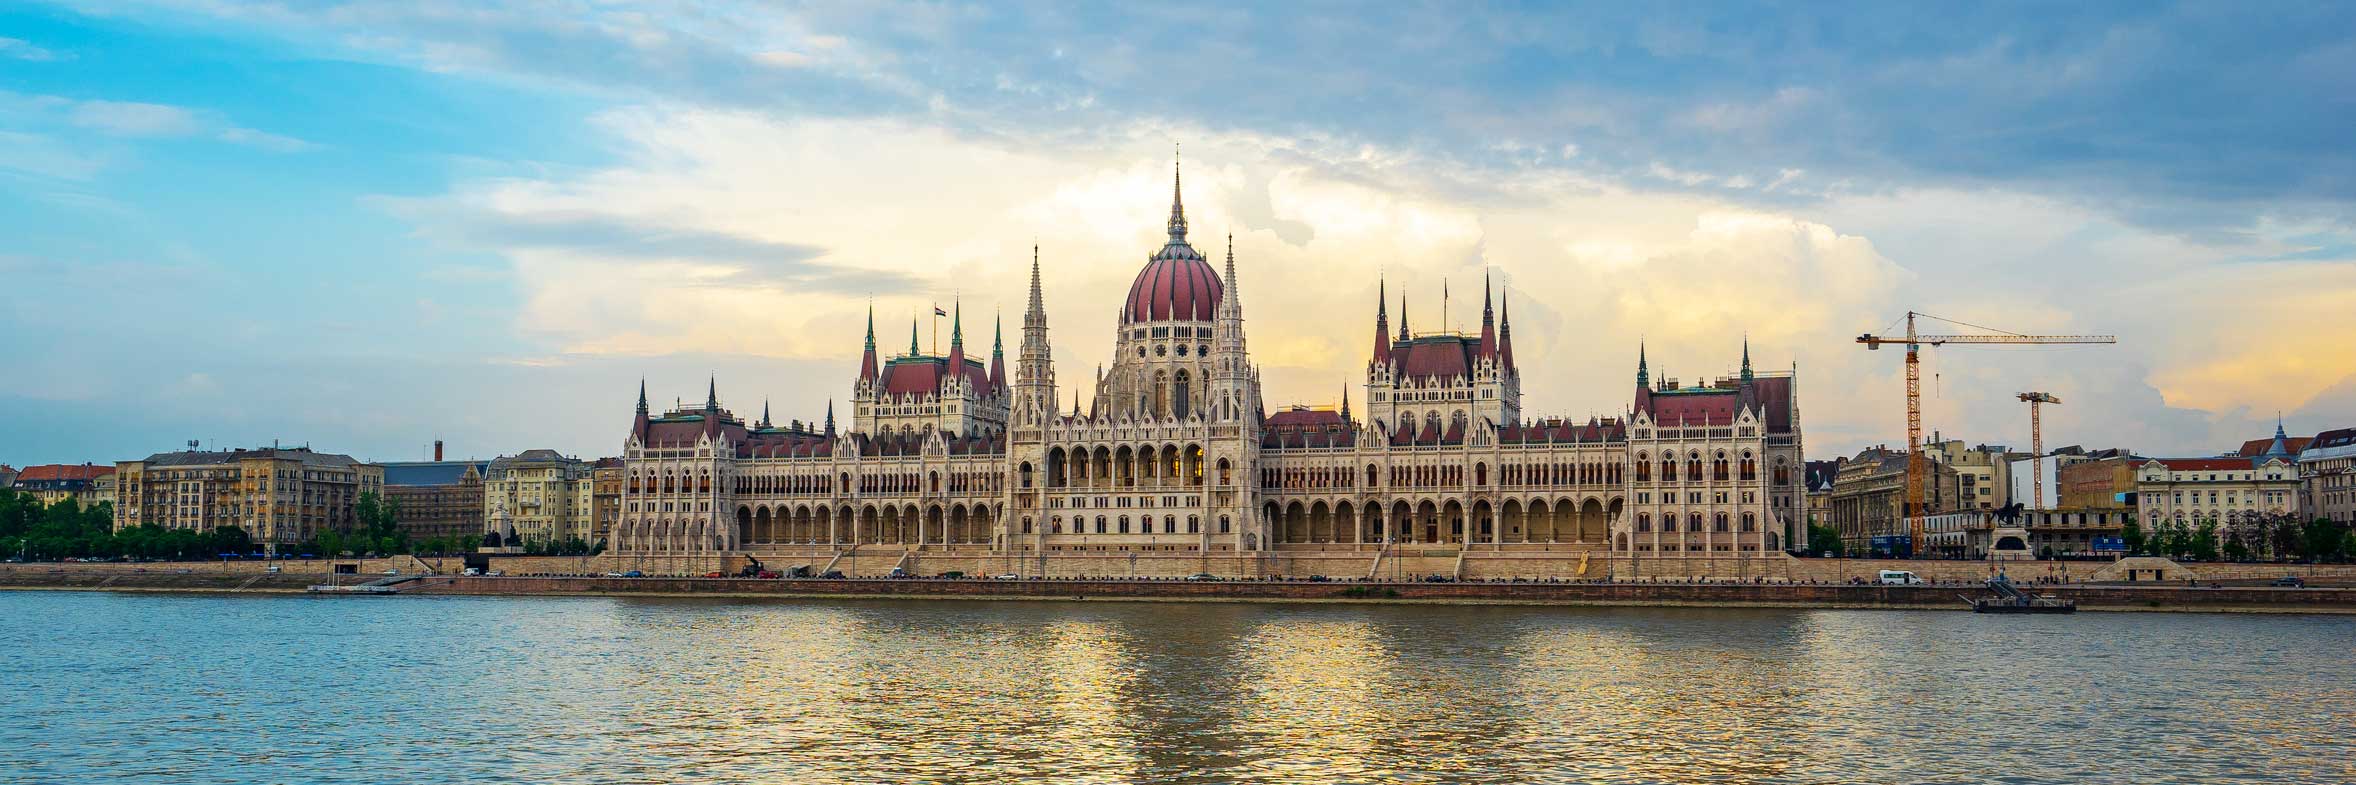 Budapest Parliament building in Hungary